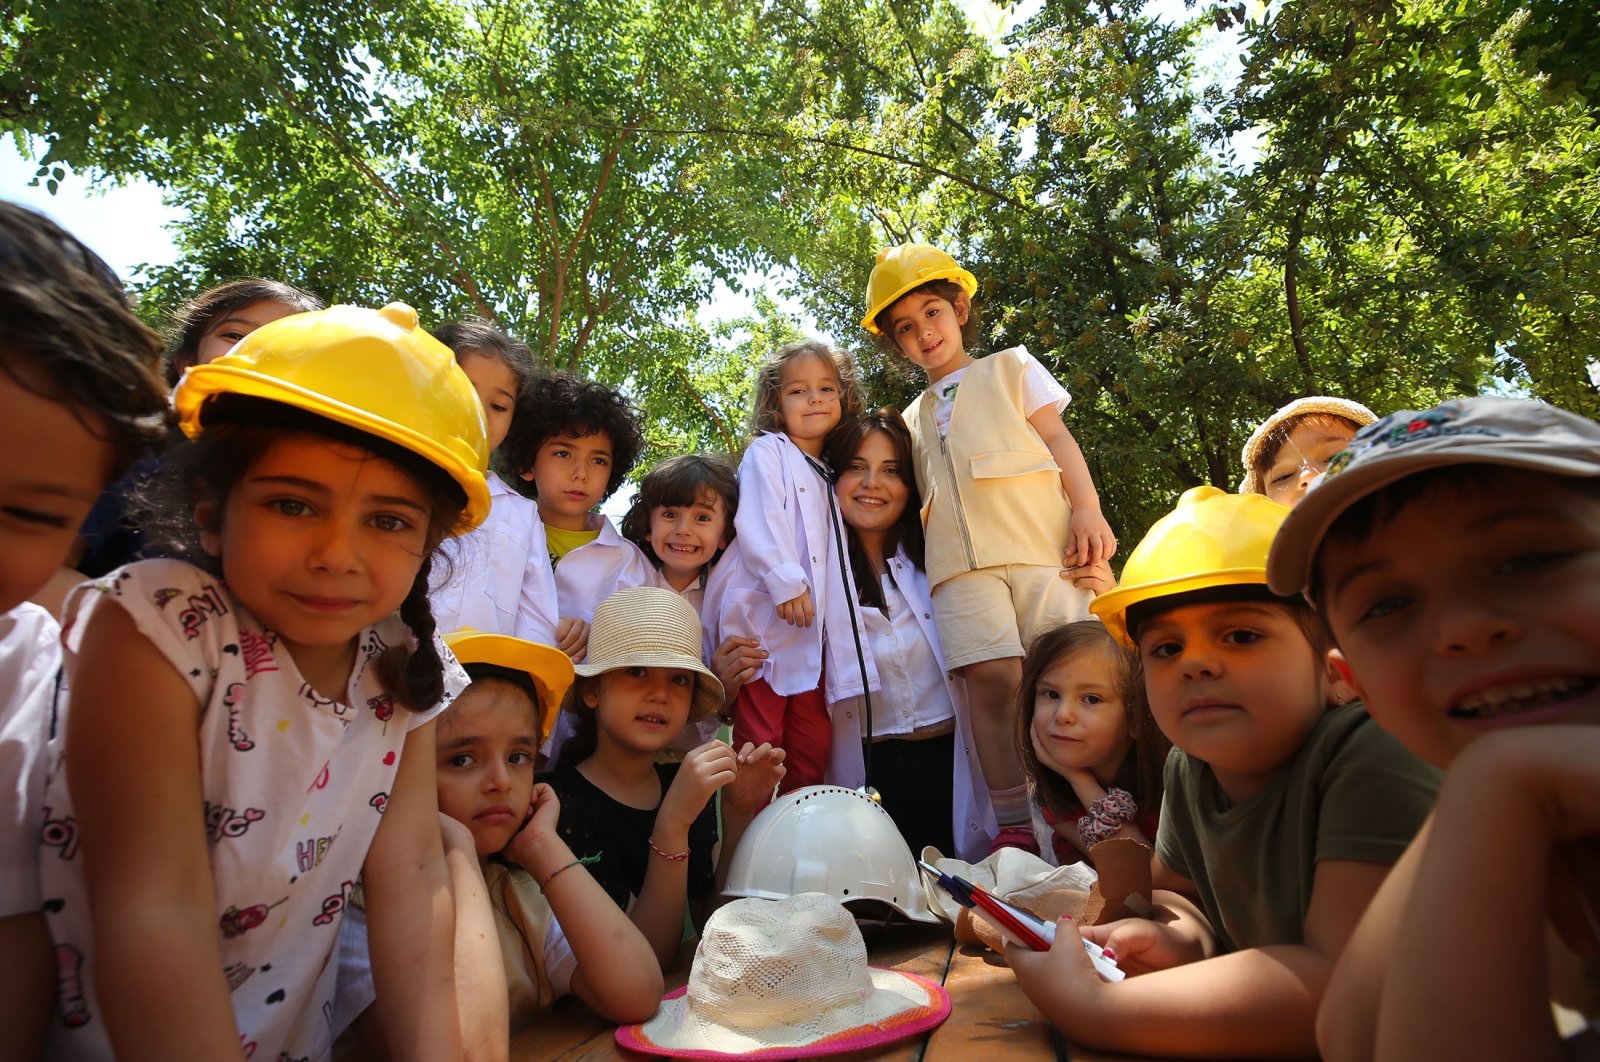 Children learn about being an archaeologist with physical recreation activities in a kindergarten, in Gaziantep, Turkey, June 12, 2022. (AA Photo)